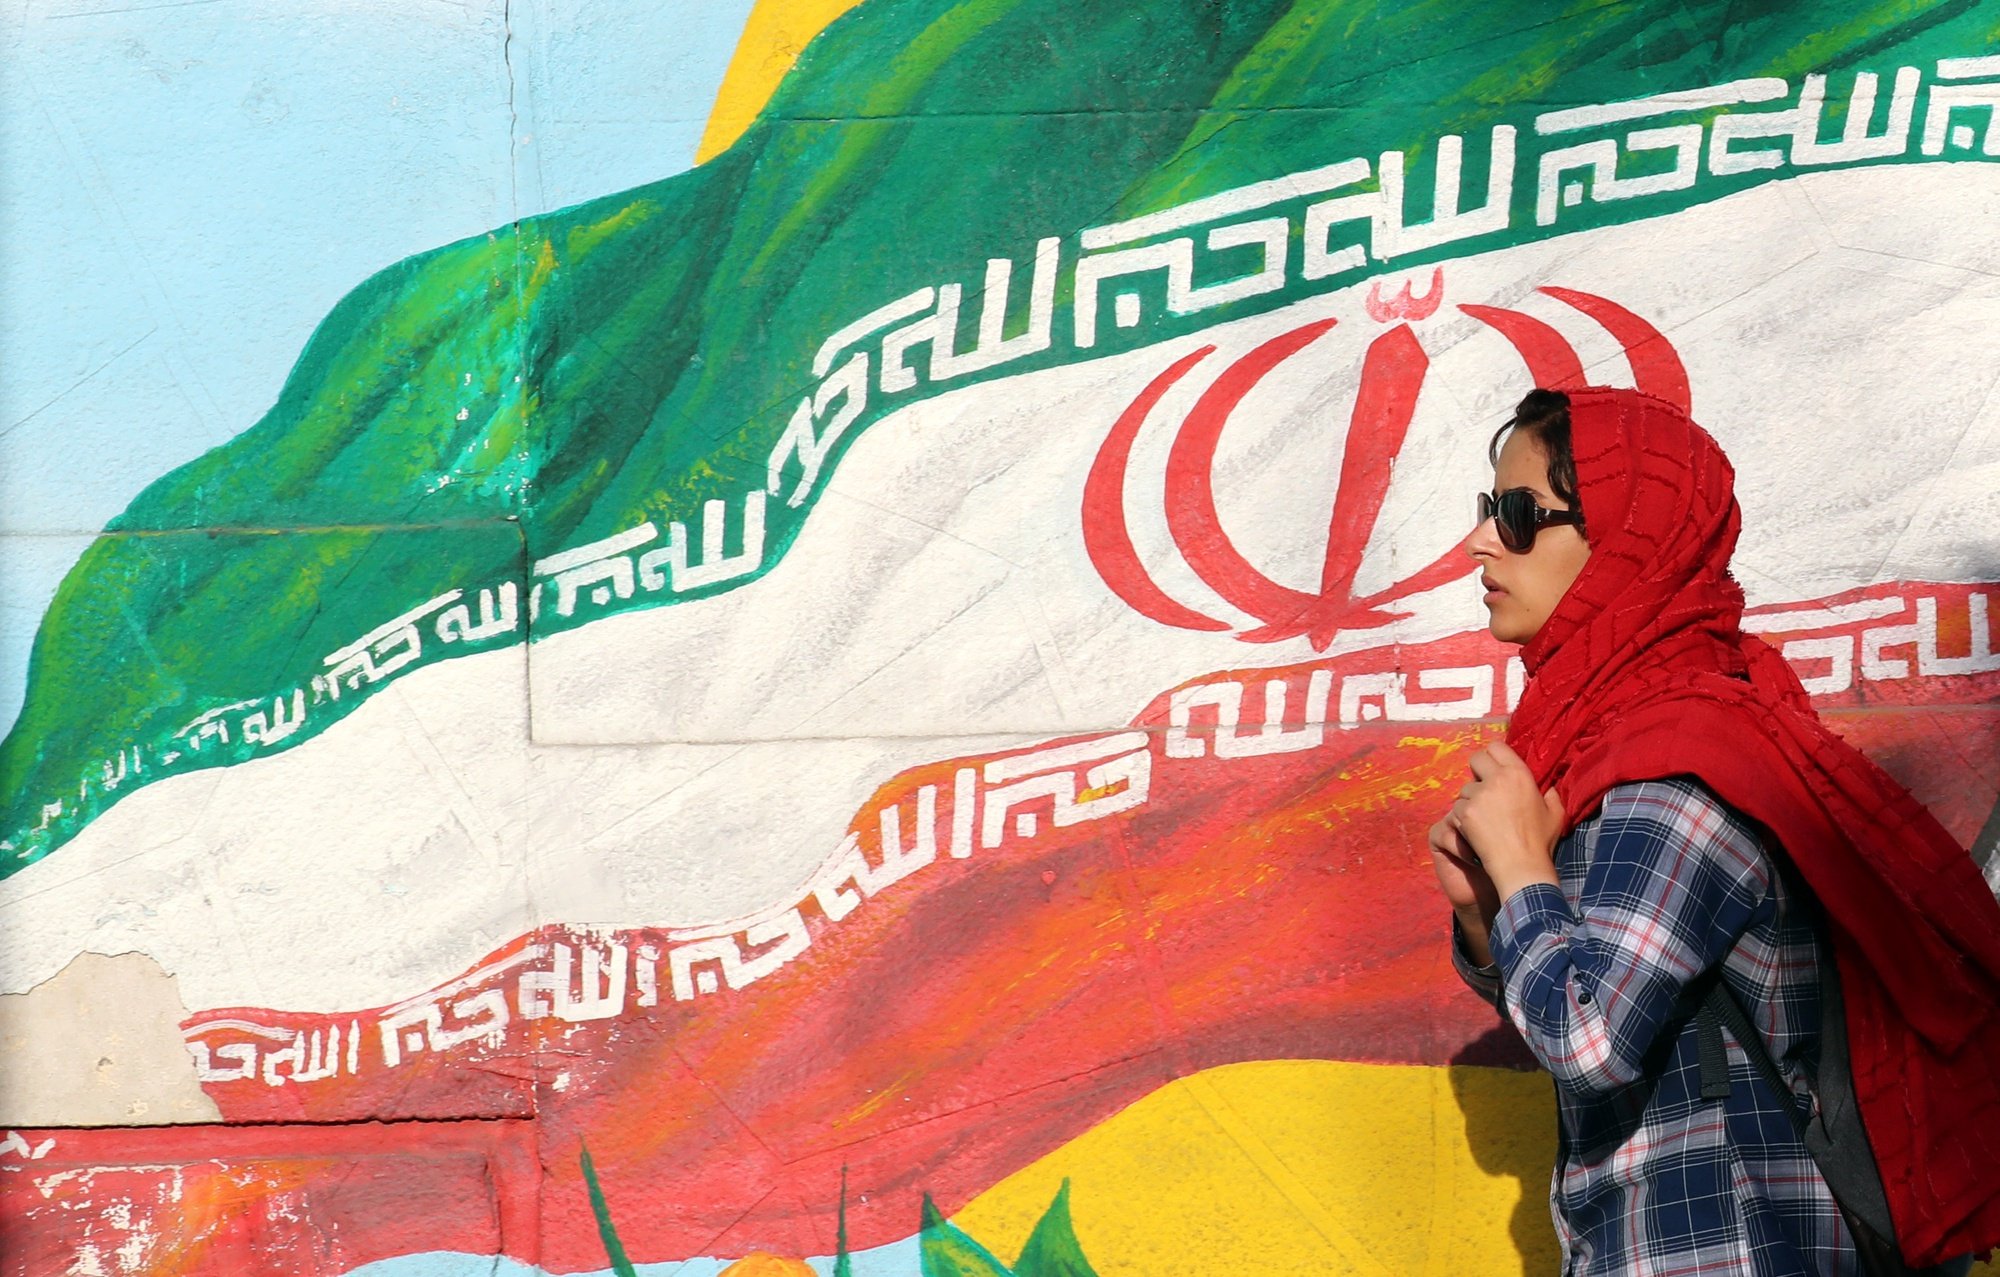 epa09992137 An Iranian walks next to a wall painting of Iran’s national flag at a street in Tehran, Iran, 02 June 2022. The Iranian Health Ministry announced zero death toll from COVID-19 for the first time since the beginning of the pandemic.  EPA/ABEDIN TAHERKENAREH